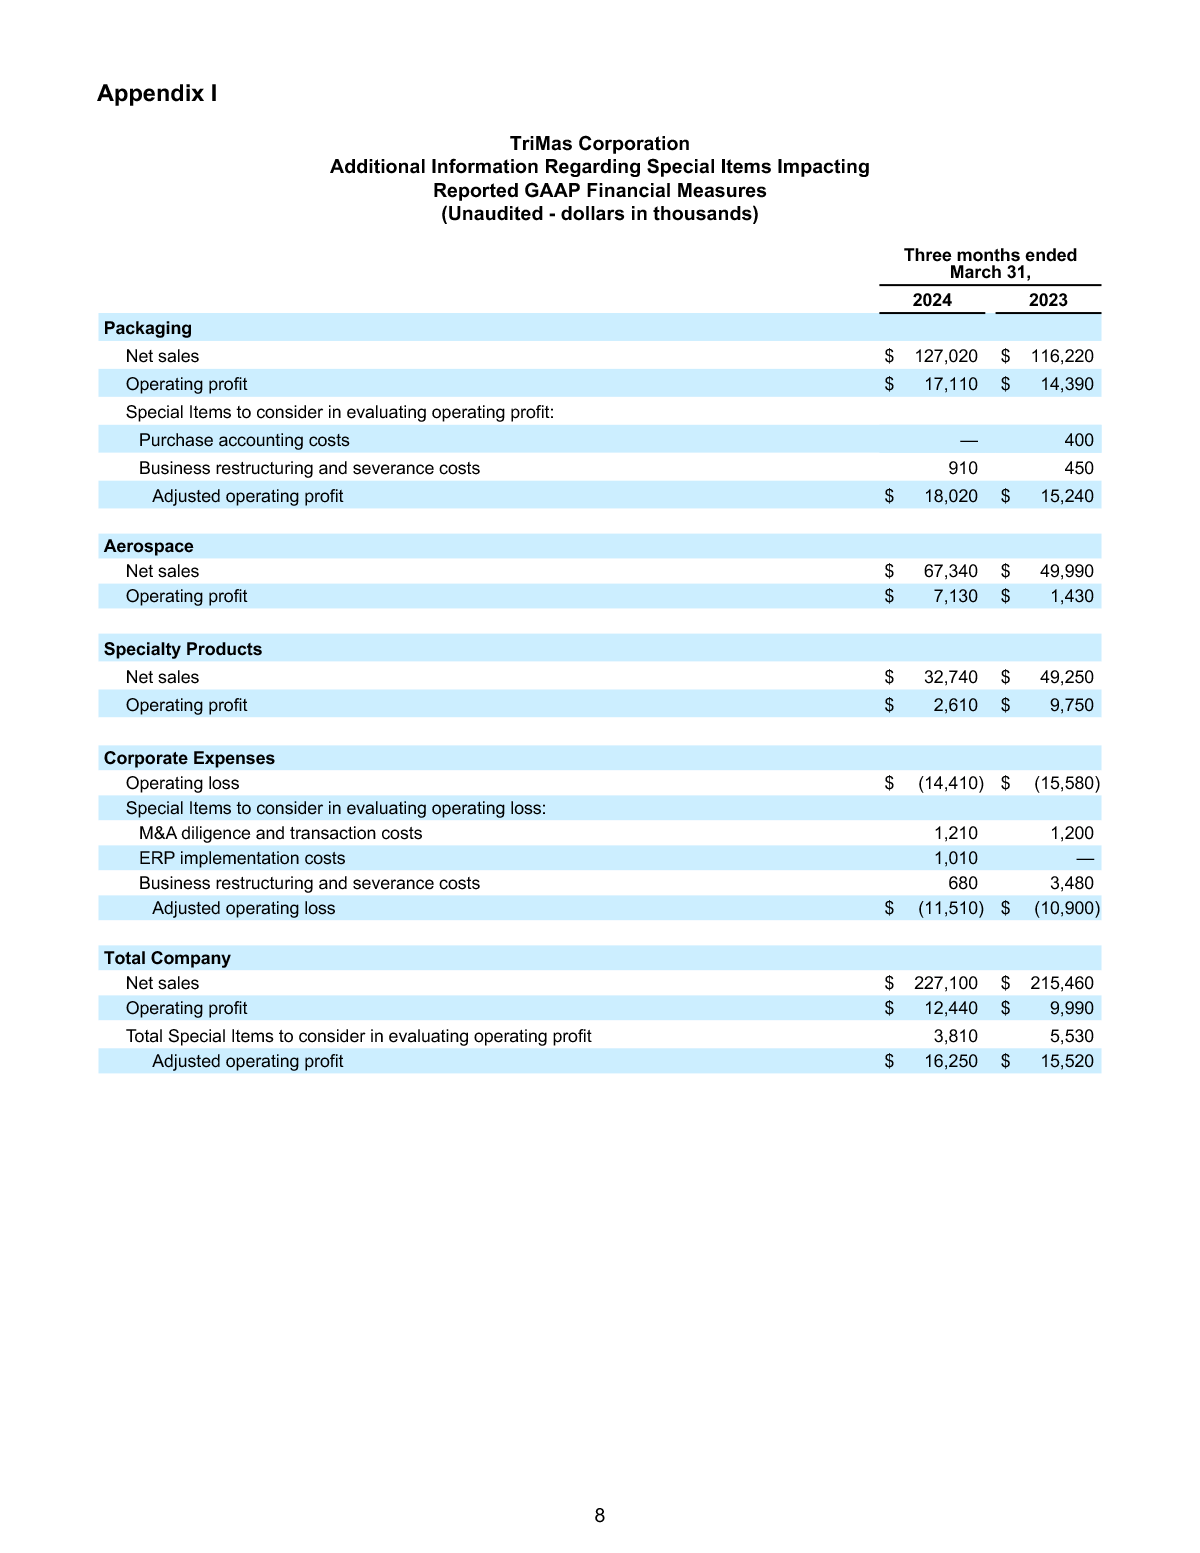 FINAL 4 30 24 Q1 Earnings Release page 8 image